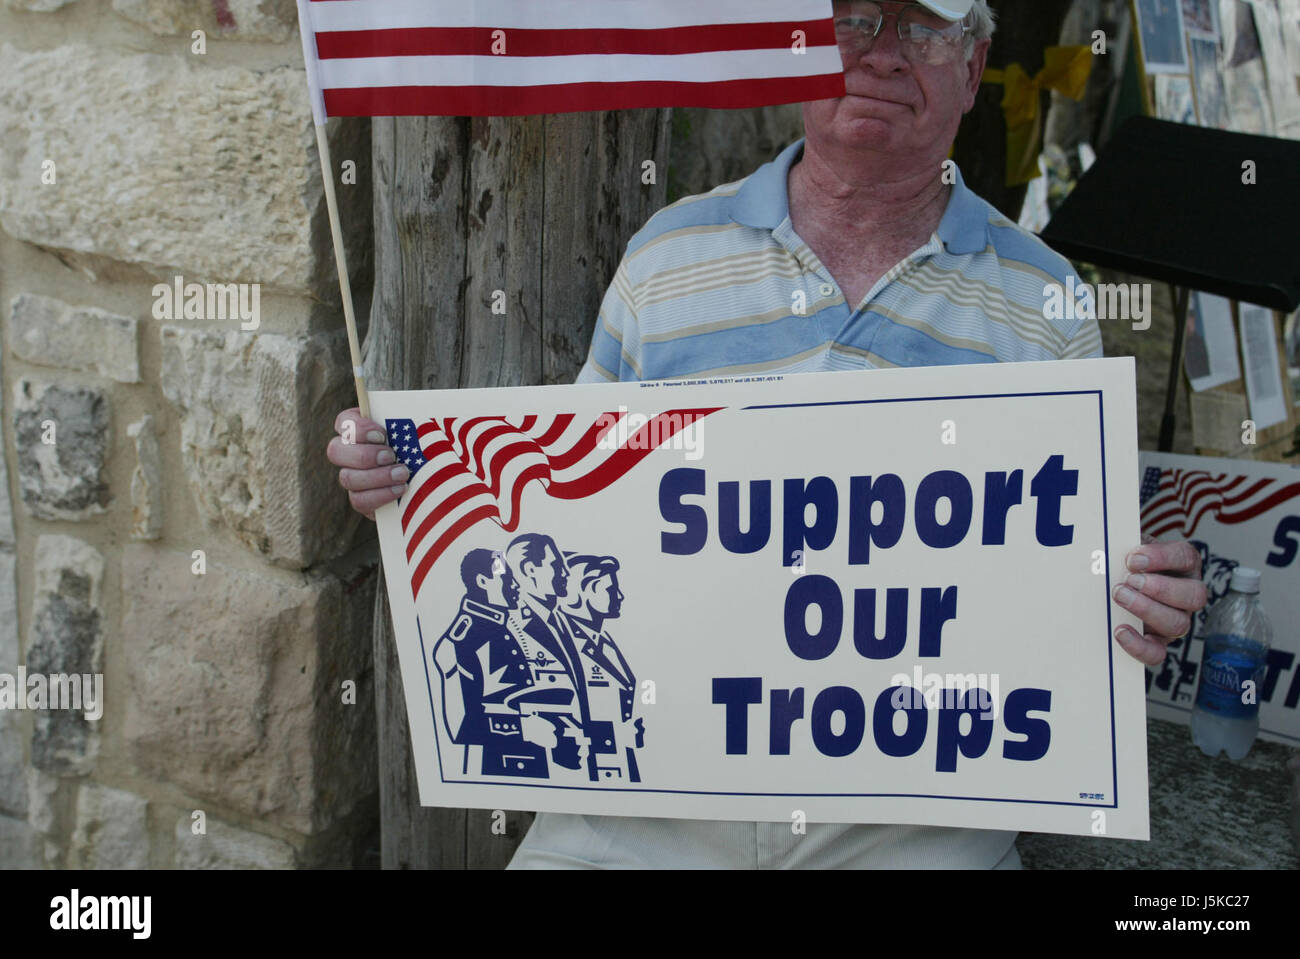 a Bush and Troops supports counter protests near the Yellow Rose during the Cindy Sheehan VigilProtests against George W Bush take place near his home in Crawford, Texas over the summer of 2005. Anti-War activist Cindy Sheehan had begun the protests after her son Casey Sheehan was killed in Iraq during the U.S. invasion. Sheehan demanded that Bush talk to her about the war, and when he didn't, she set up a protest outside his ranch. Stock Photo